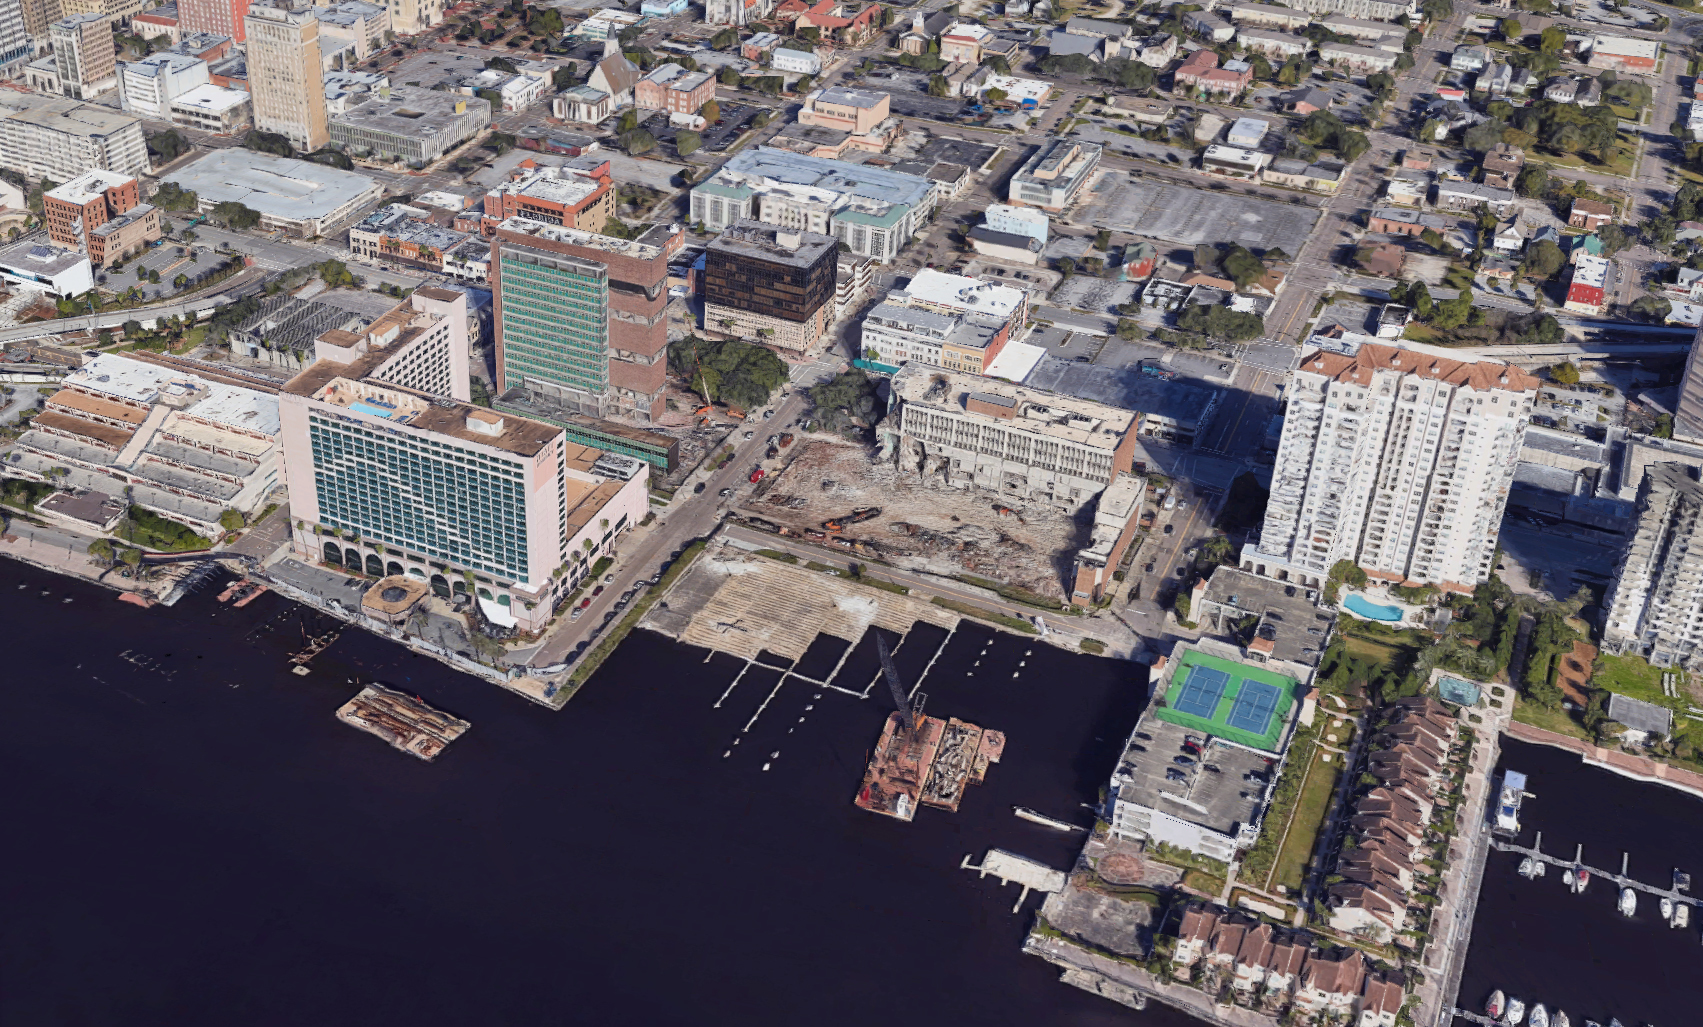 The old City Hall Annex and the partially demolished old Duval County Courthouse are seen in this satellite image. (Google)